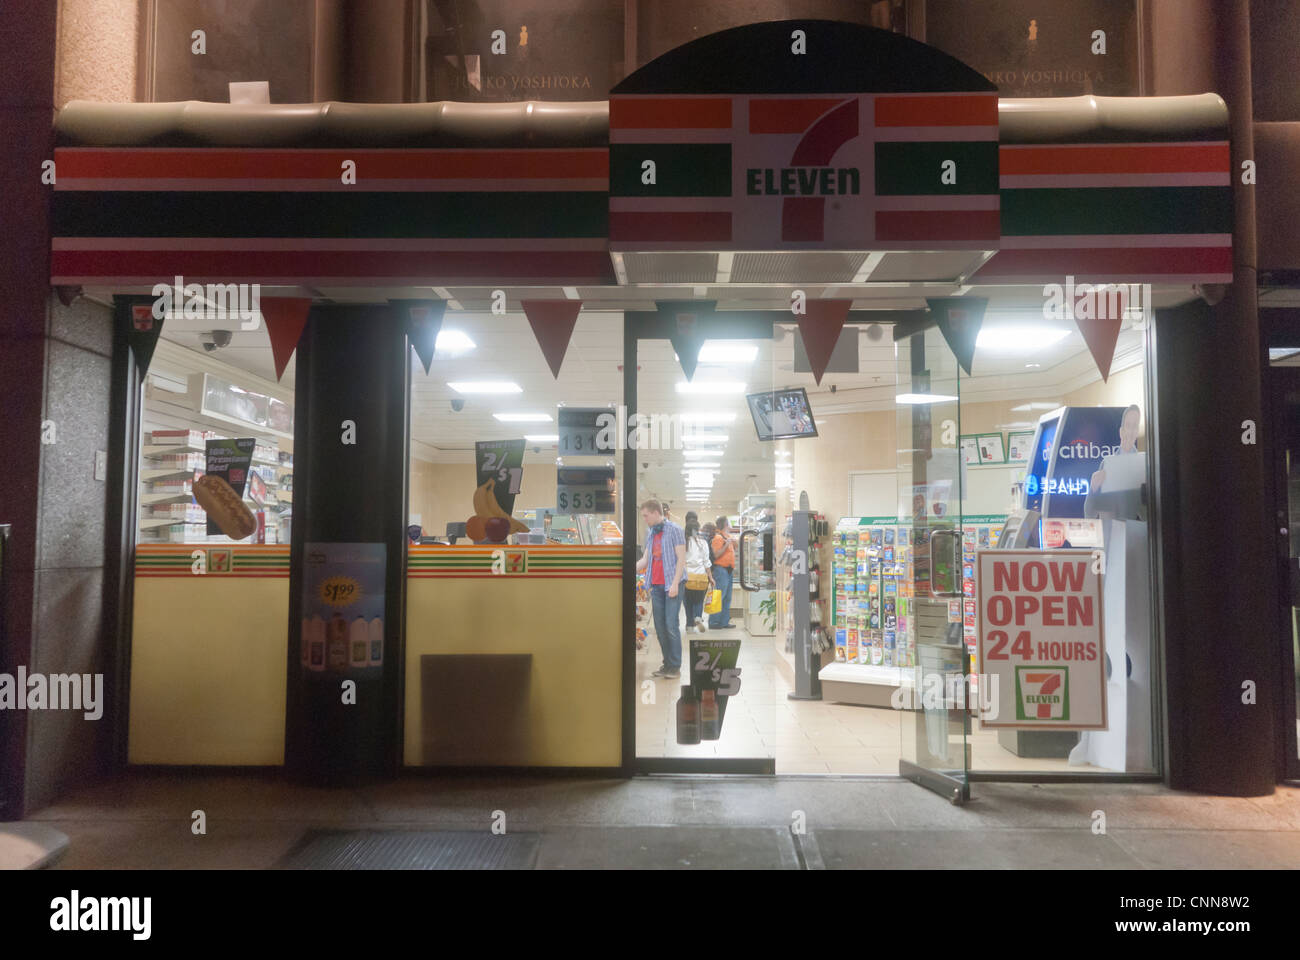 A 7-Eleven store in the Flatiron neighborhood in New York Stock Photo